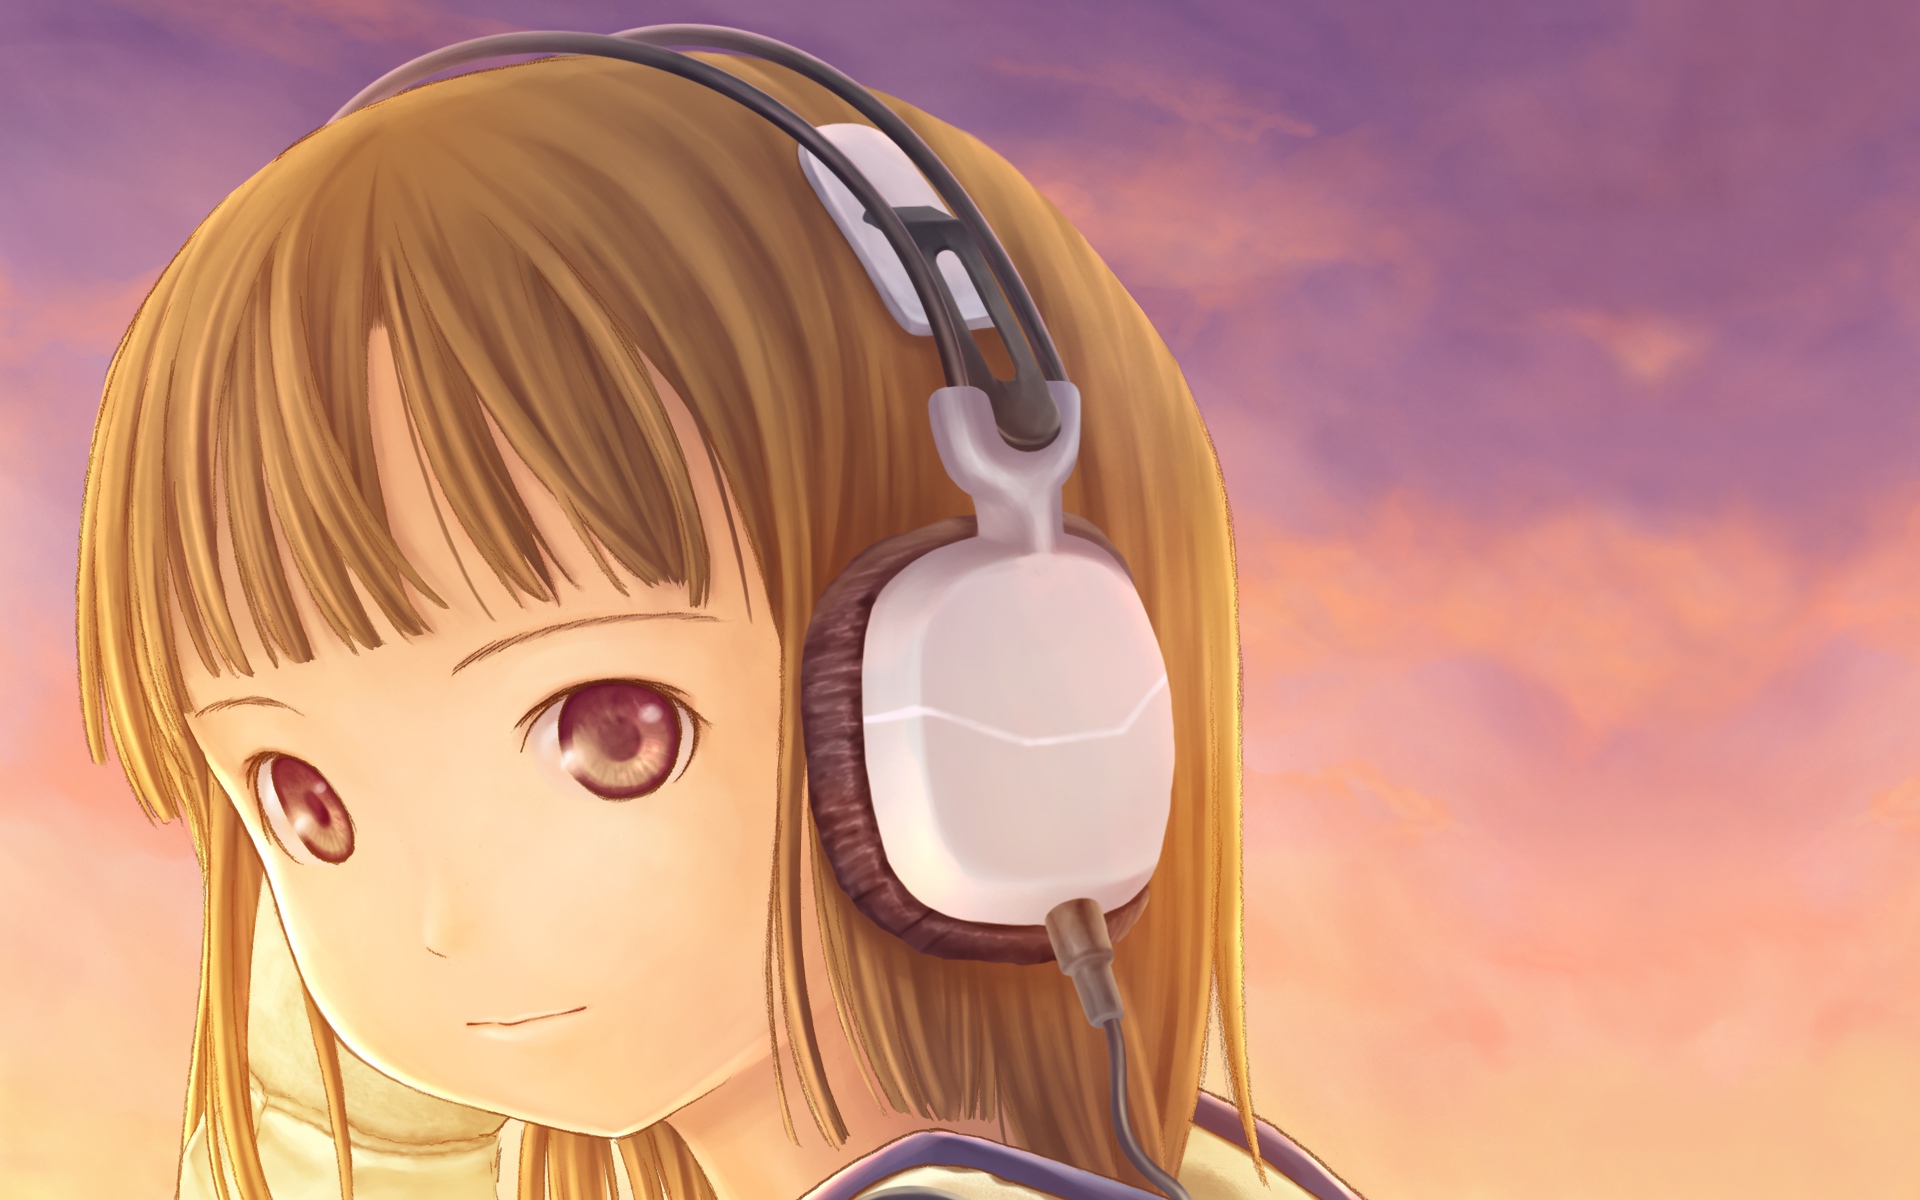 Anime girl wearing headphones, listening attentively, immersed in the music.